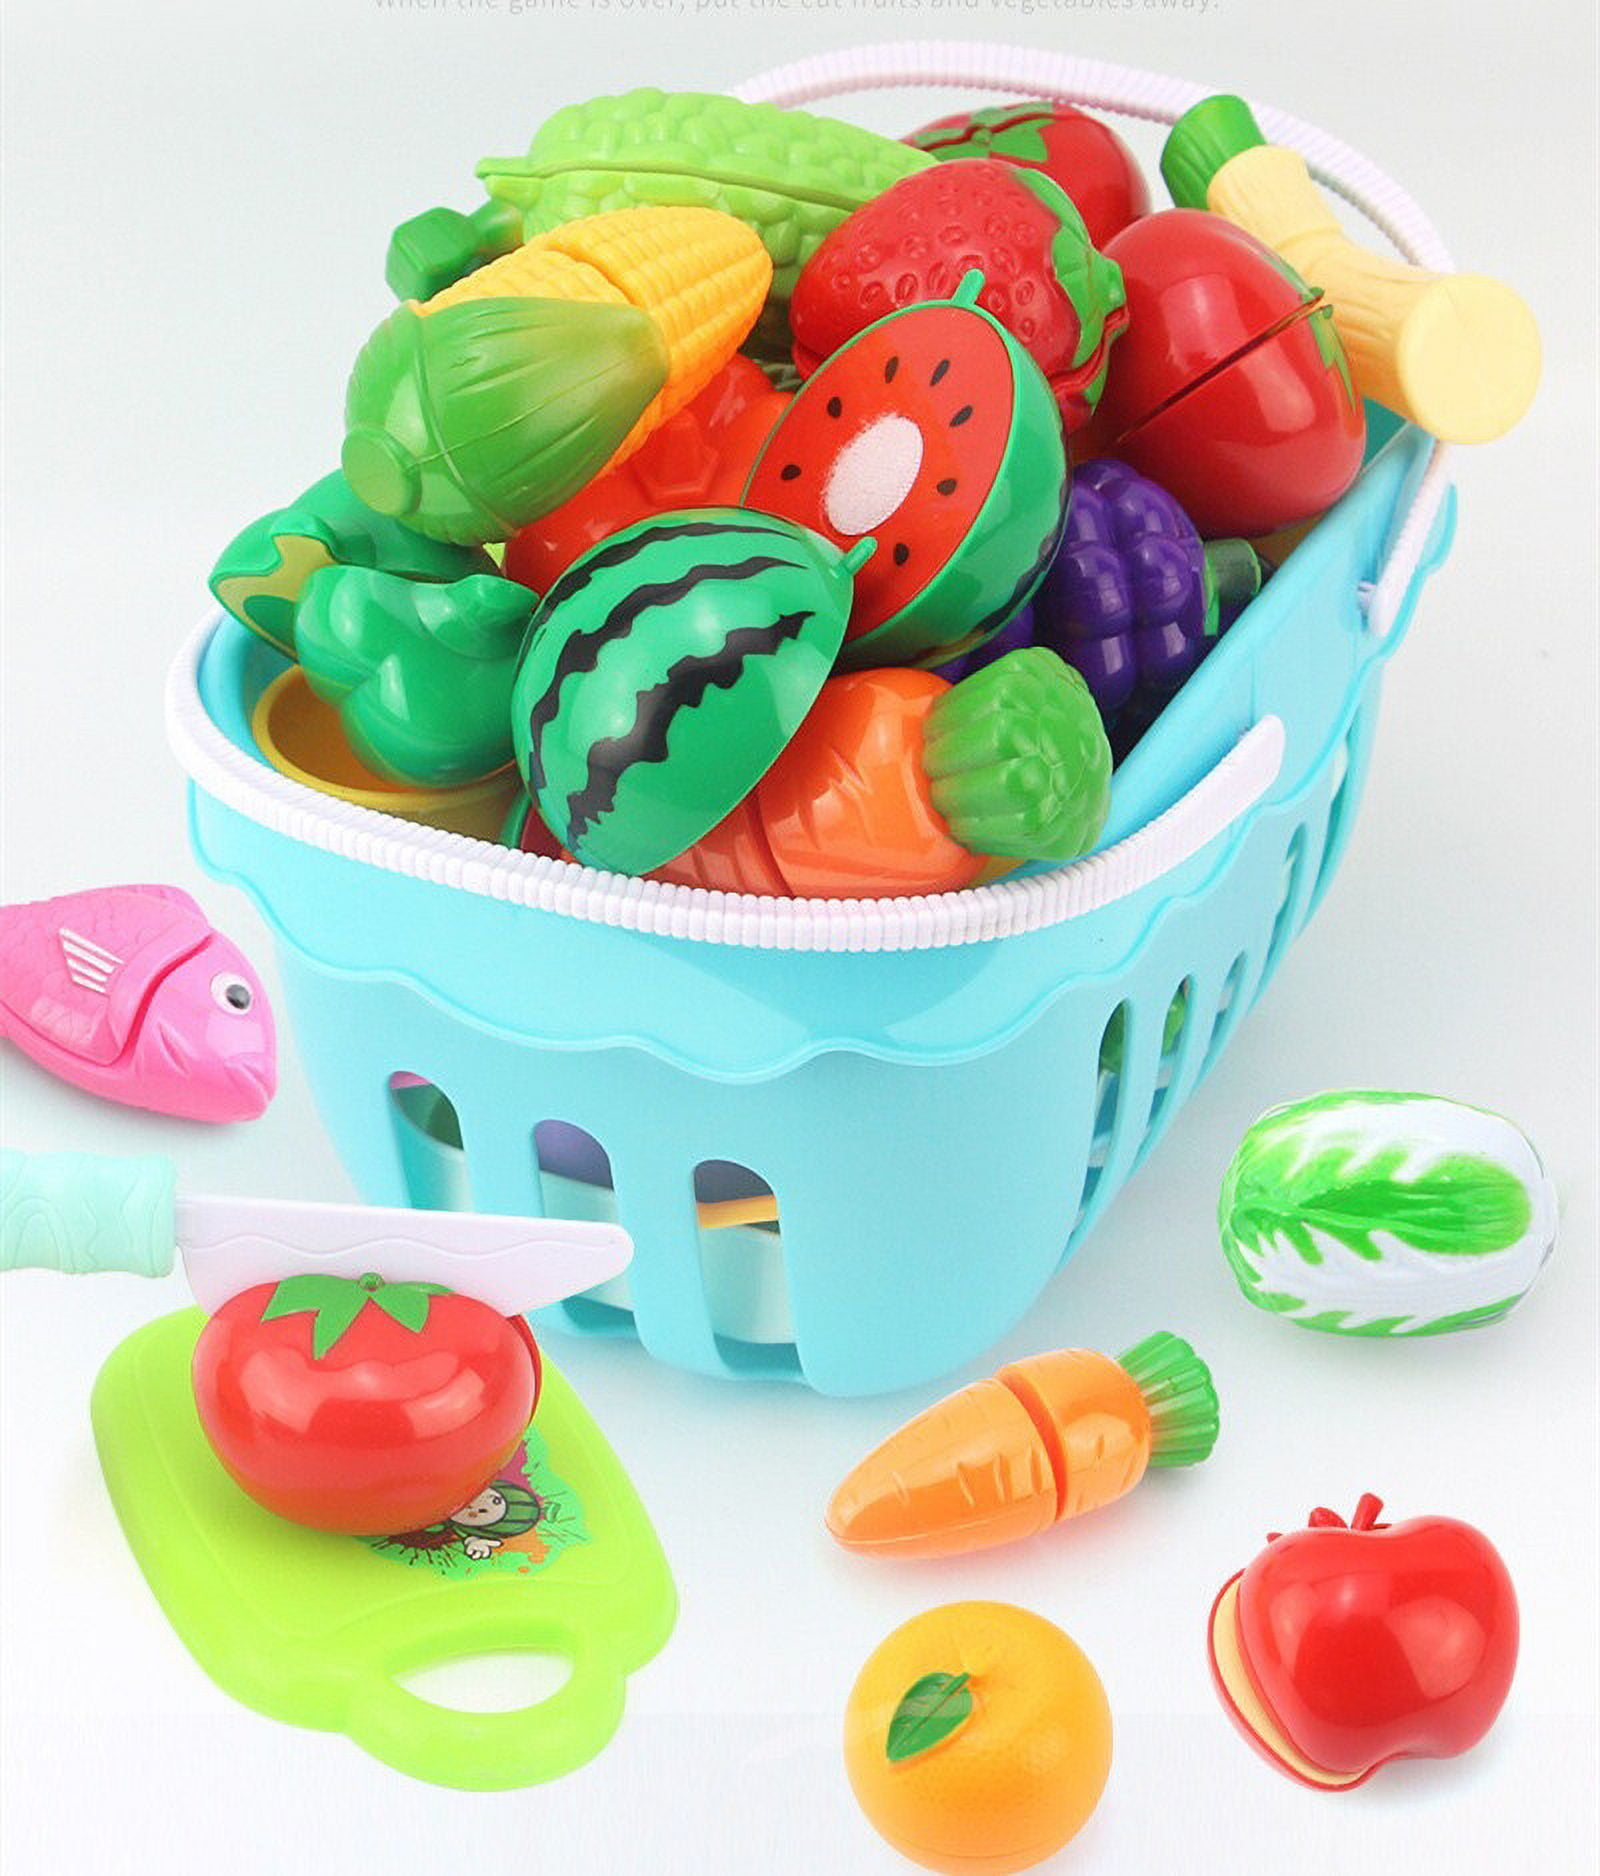 Jelly Comb 30 Pcs Cutting Play Food Toy Set for Kids,Pretend Cooking ...